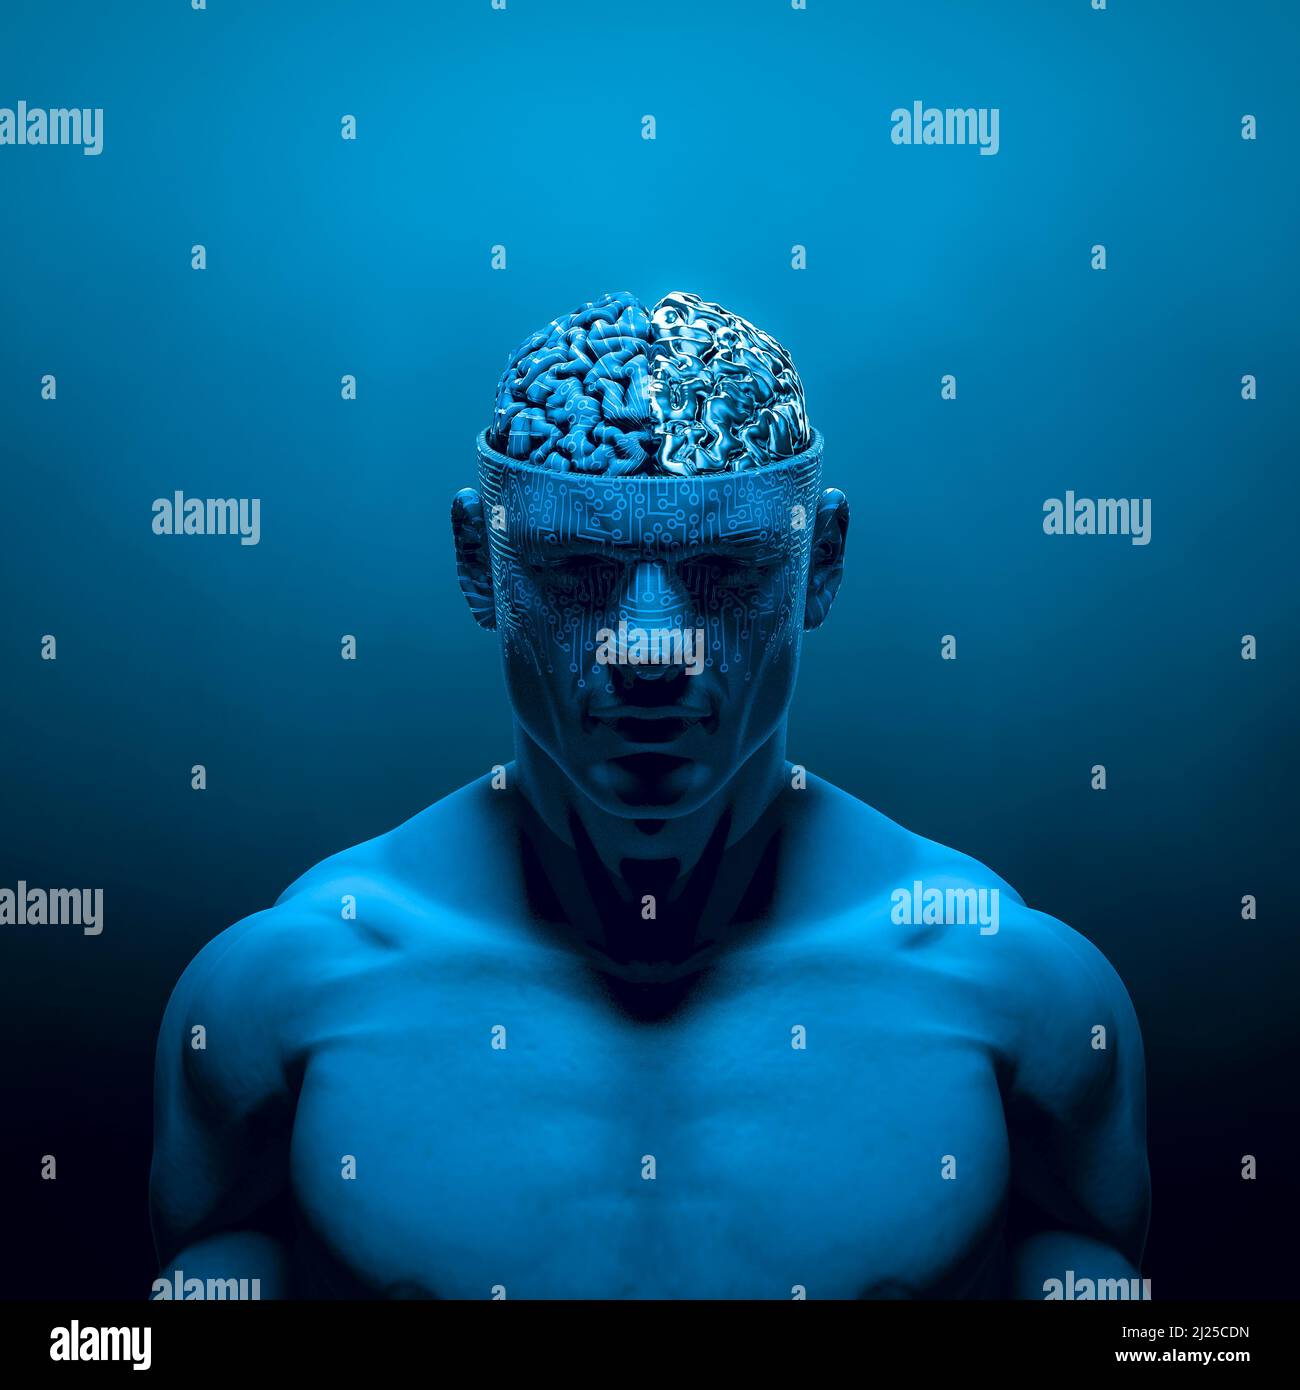 Artificial thoughts - 3D illustration of dark blue robotic male figure with metallic brain Stock Photo